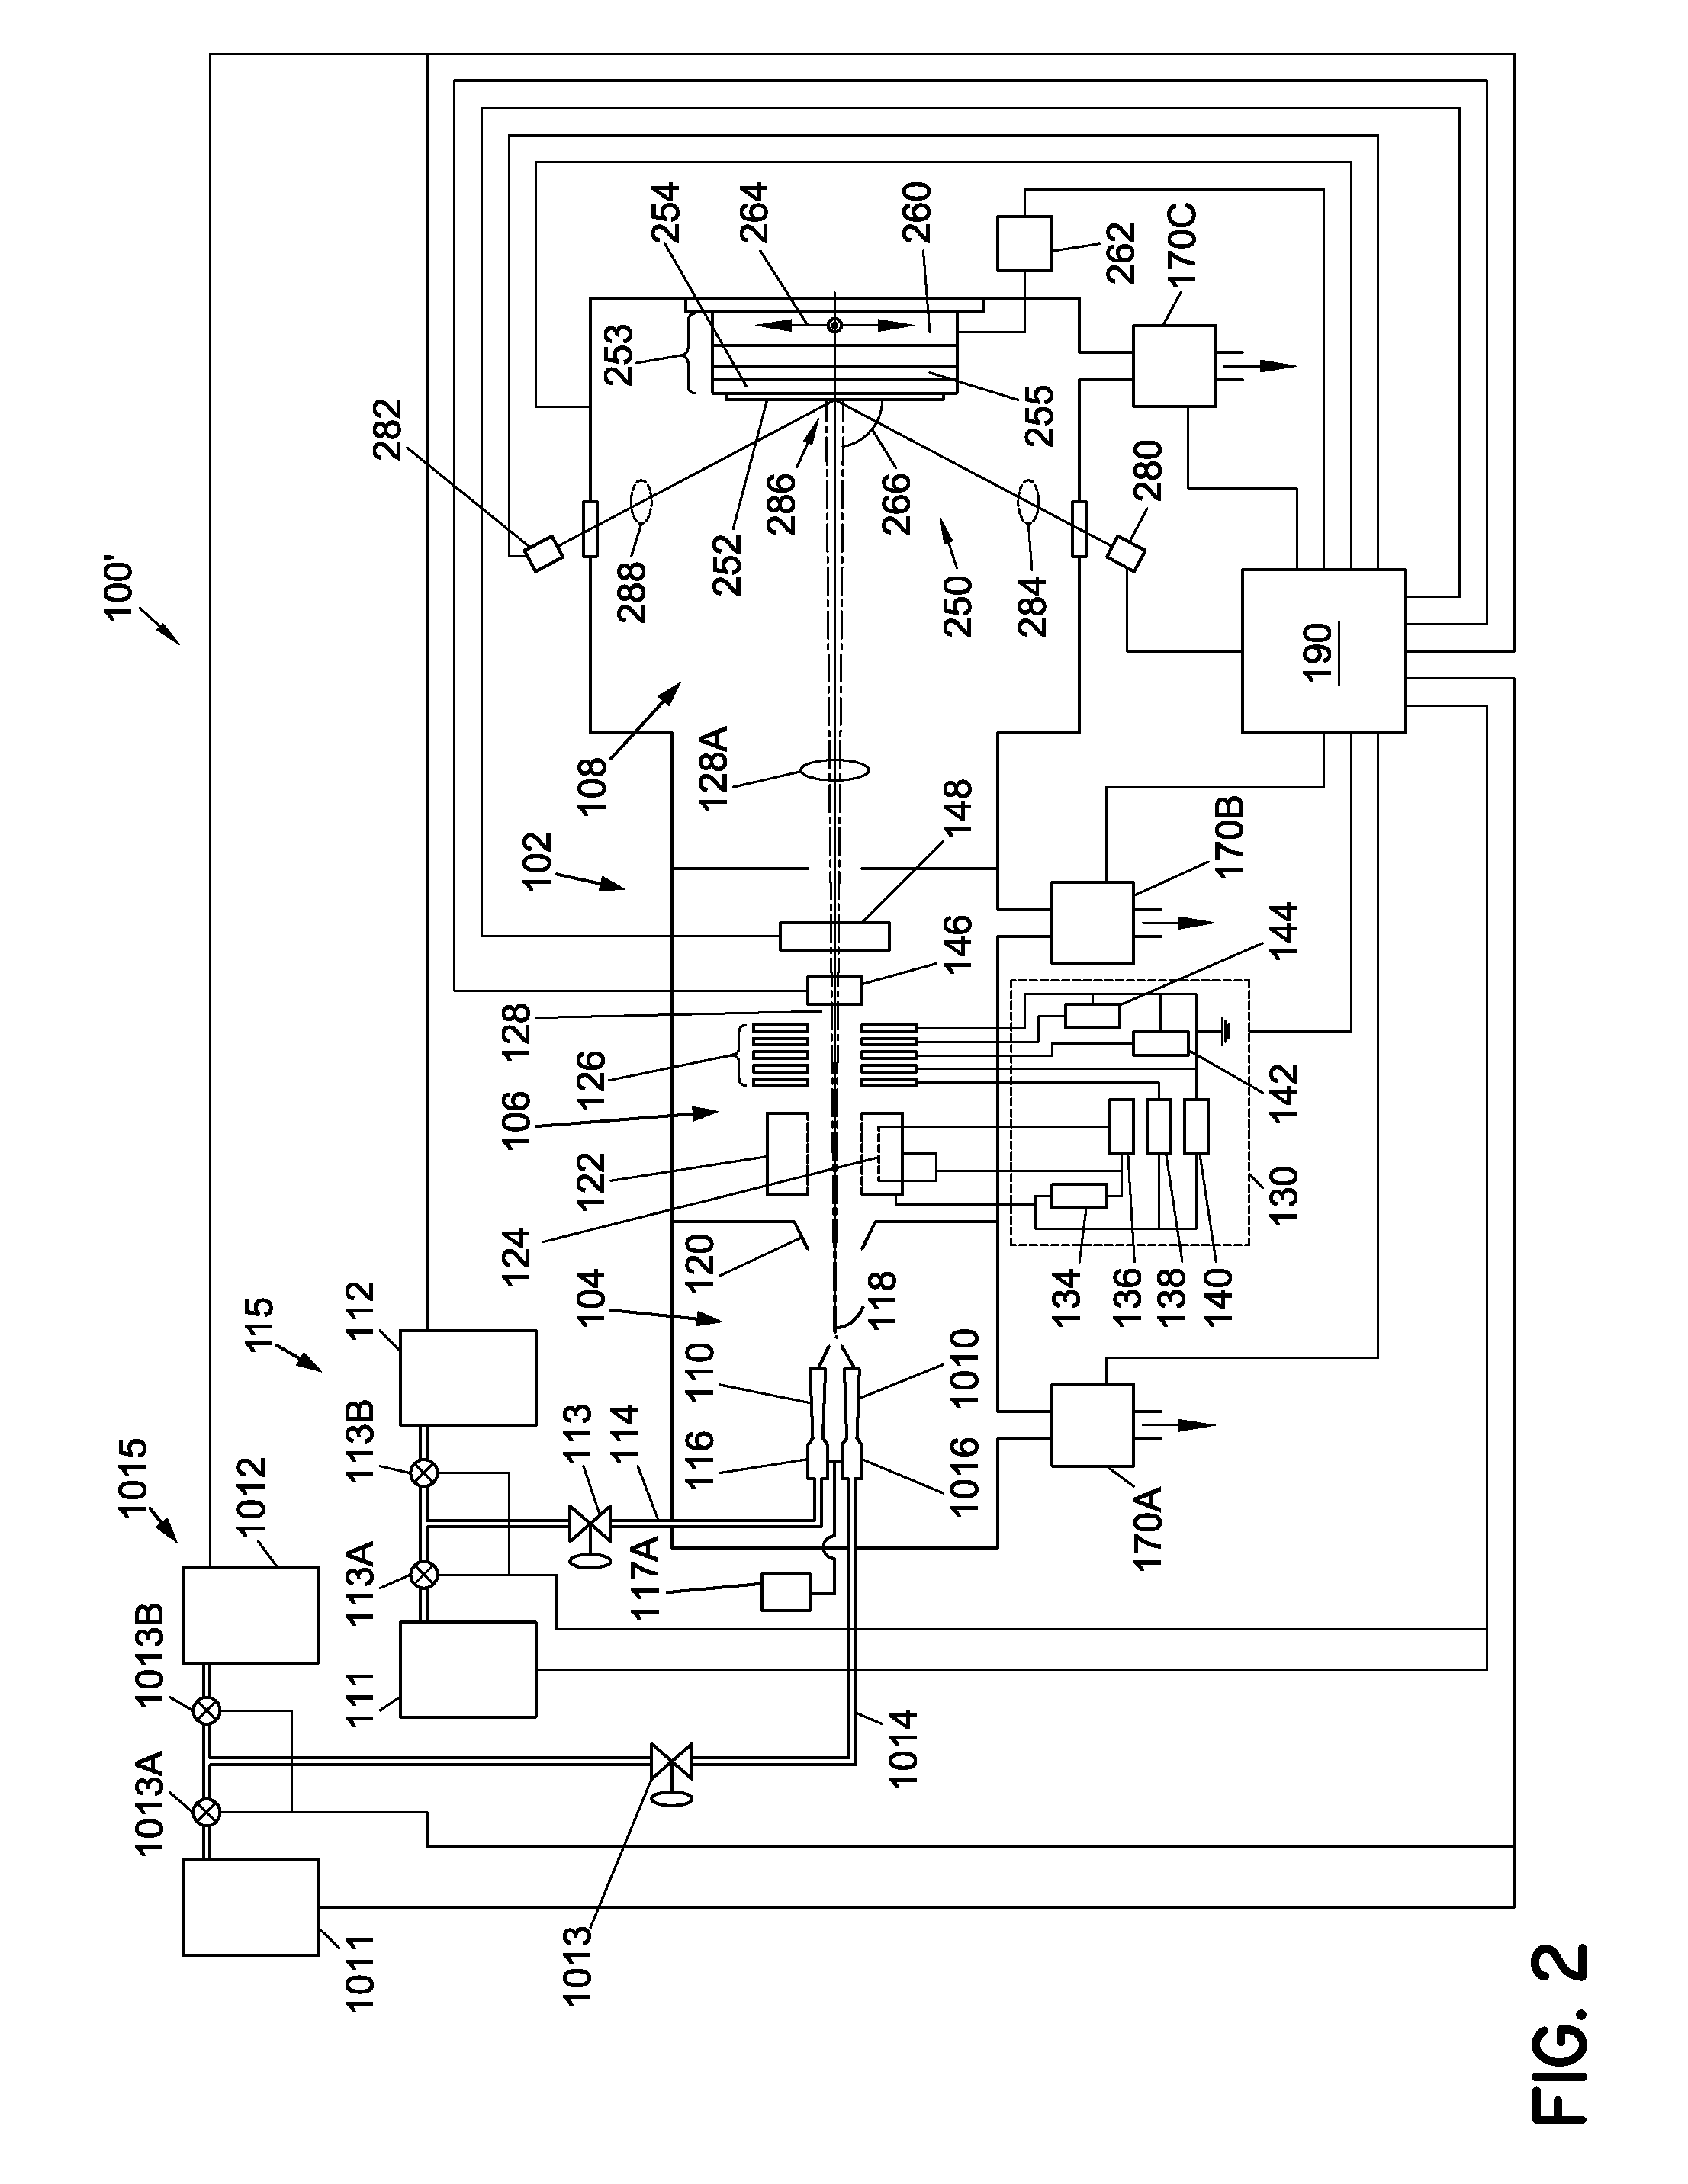 Gas cluster ion beam system with cleaning apparatus